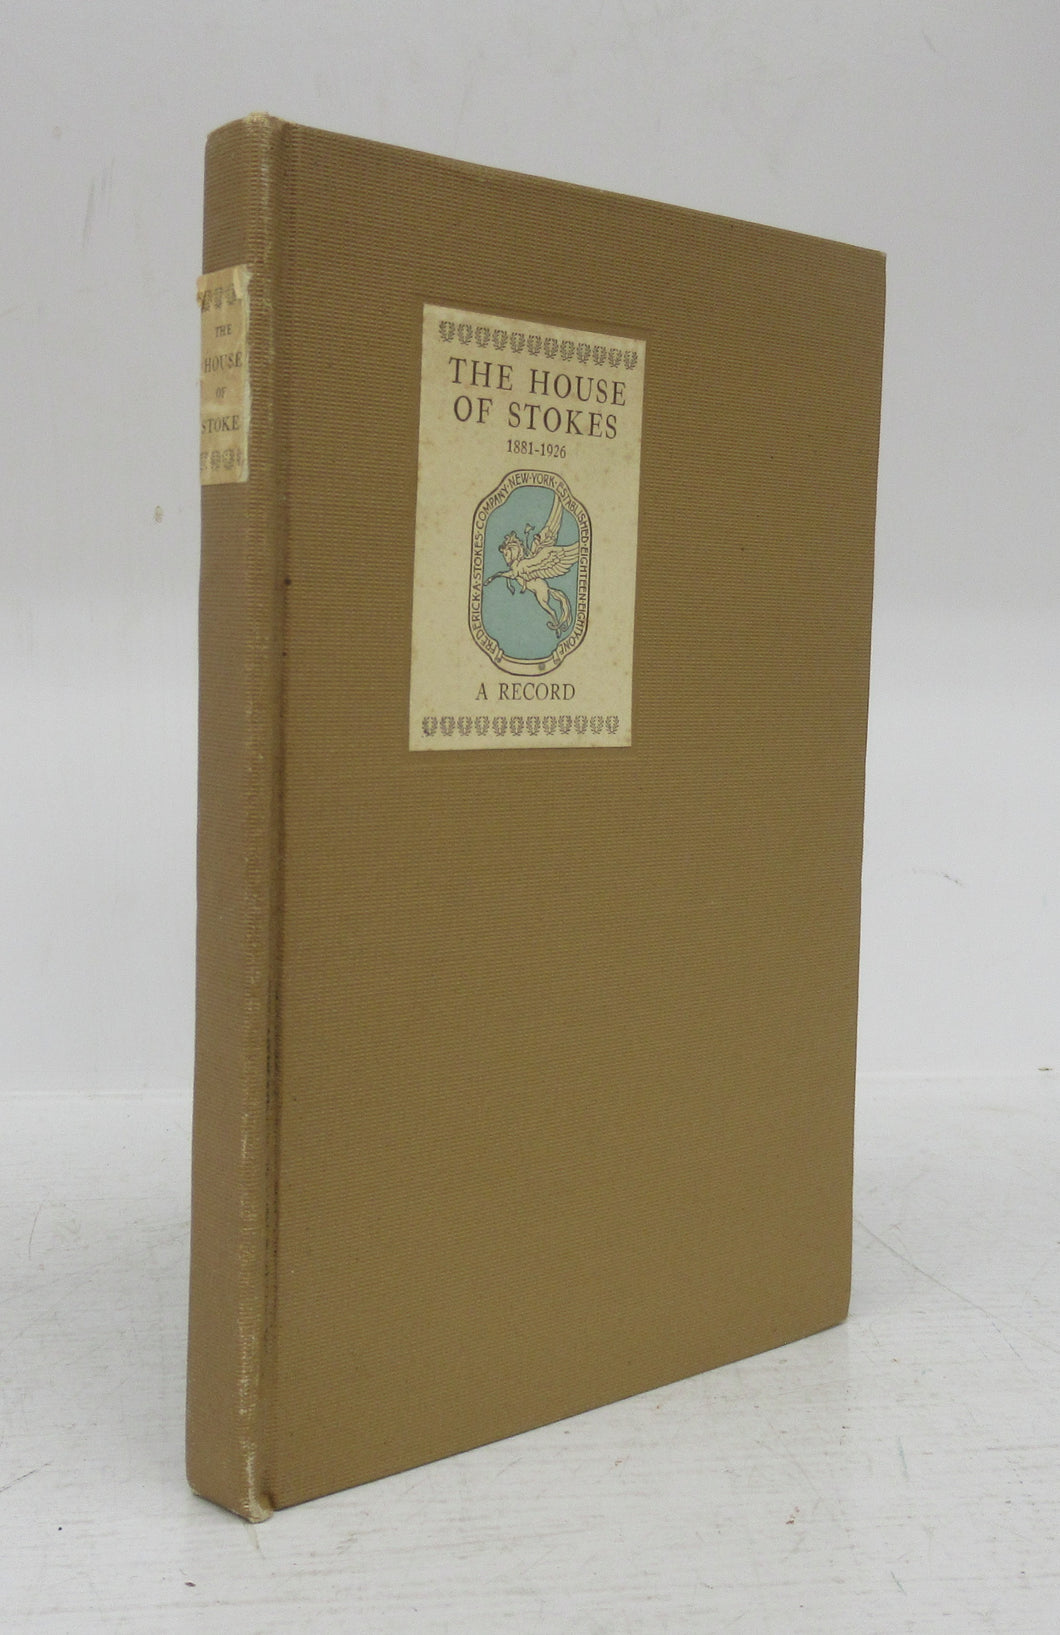 The House of Stokes 1881-1926: A Record